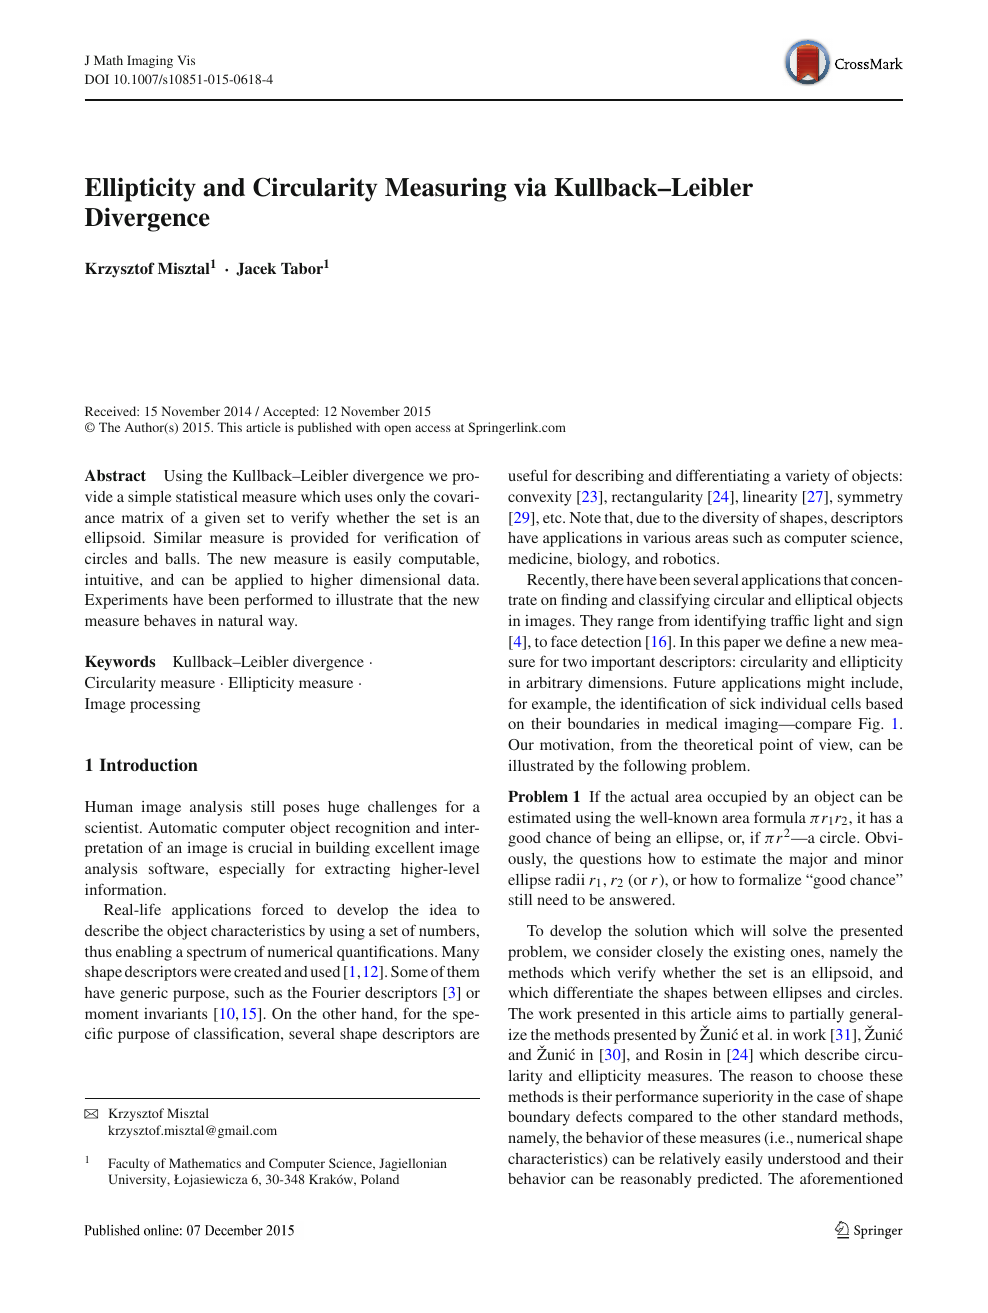 Ellipticity And Circularity Measuring Via Kullback Leibler Divergence Topic Of Research Paper In Mathematics Download Scholarly Article Pdf And Read For Free On Cyberleninka Open Science Hub